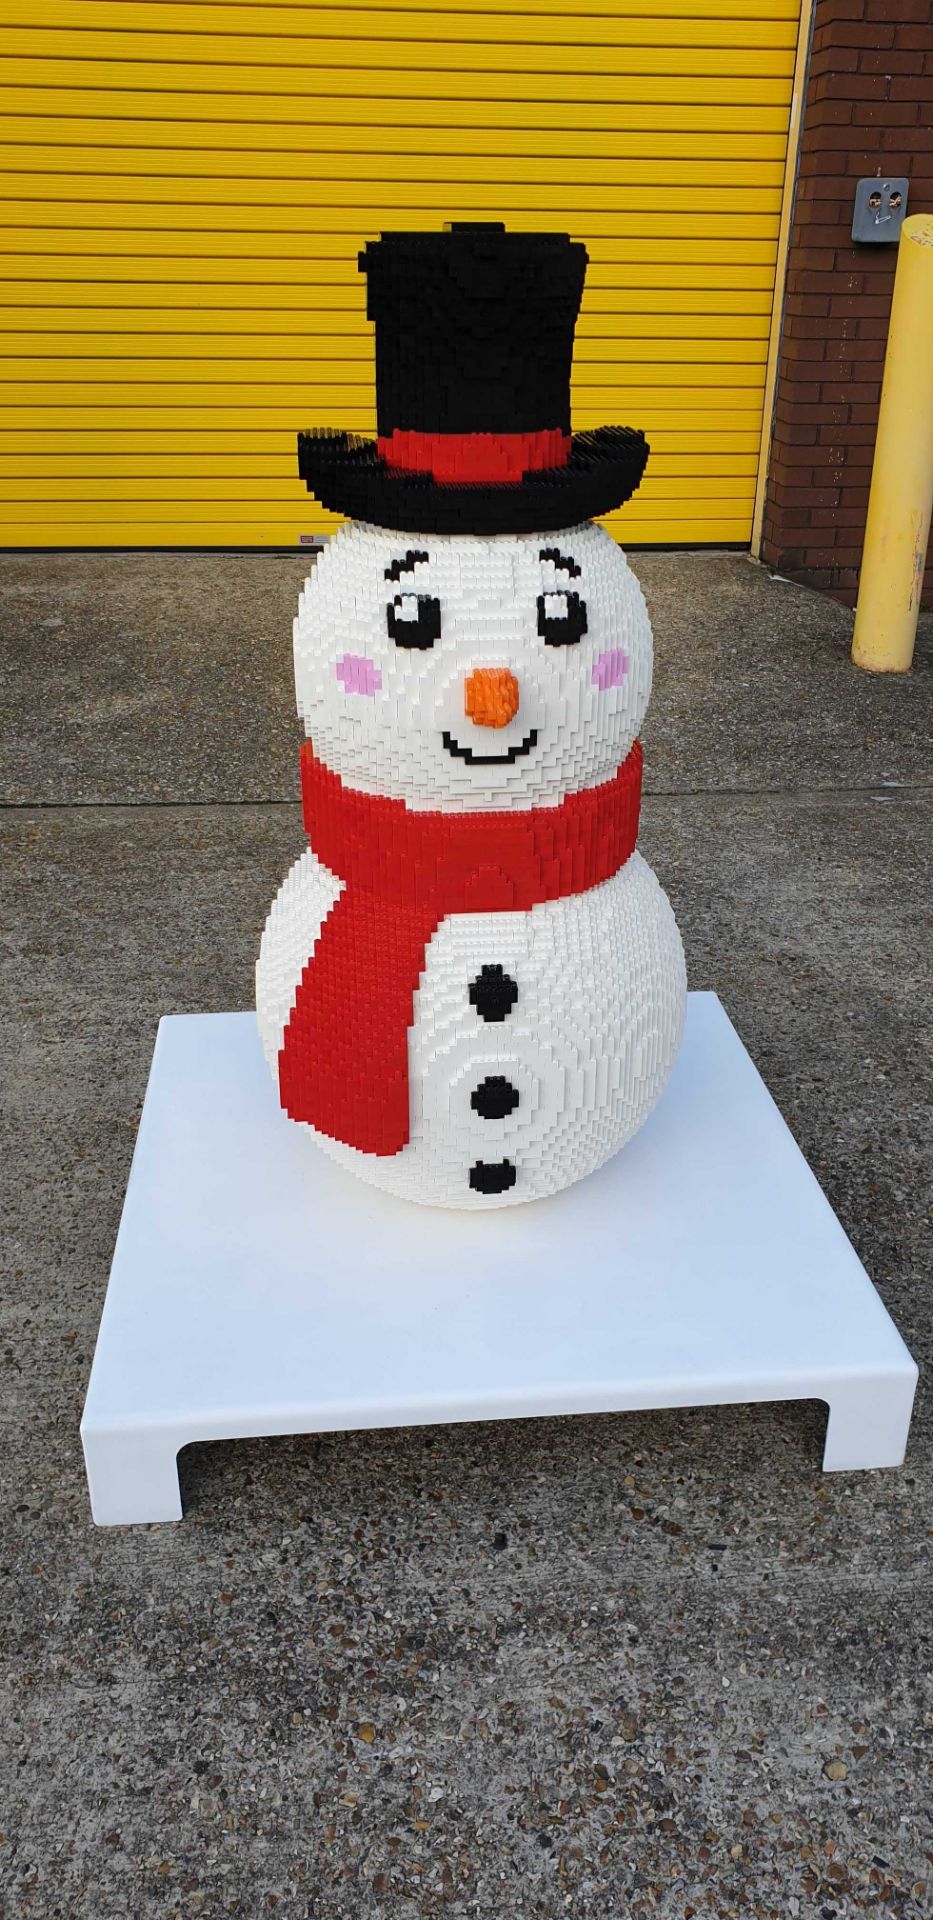 Large Snowman Lego Statue - Image 2 of 2